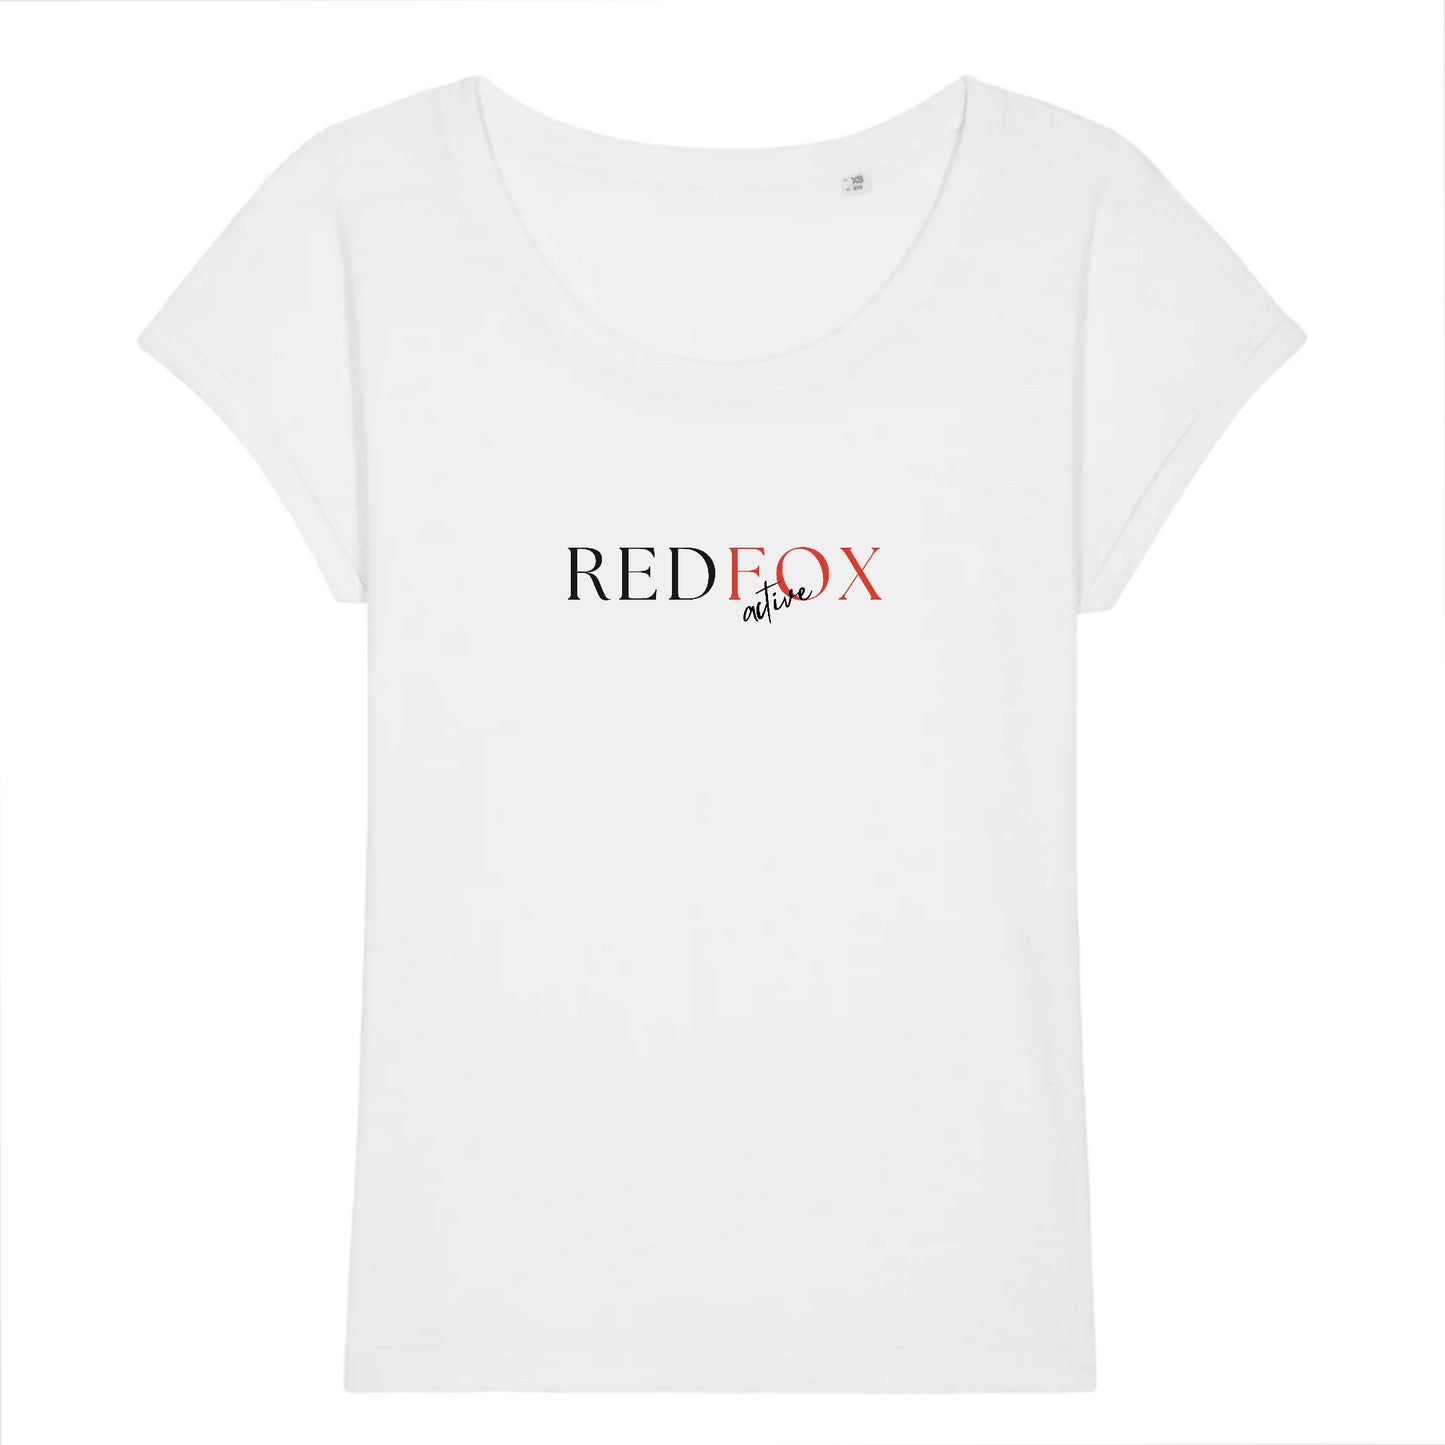 Rolled Sleeve Tee - REDFOX Active Blk/Red STELLA - 100% Organic Cotton